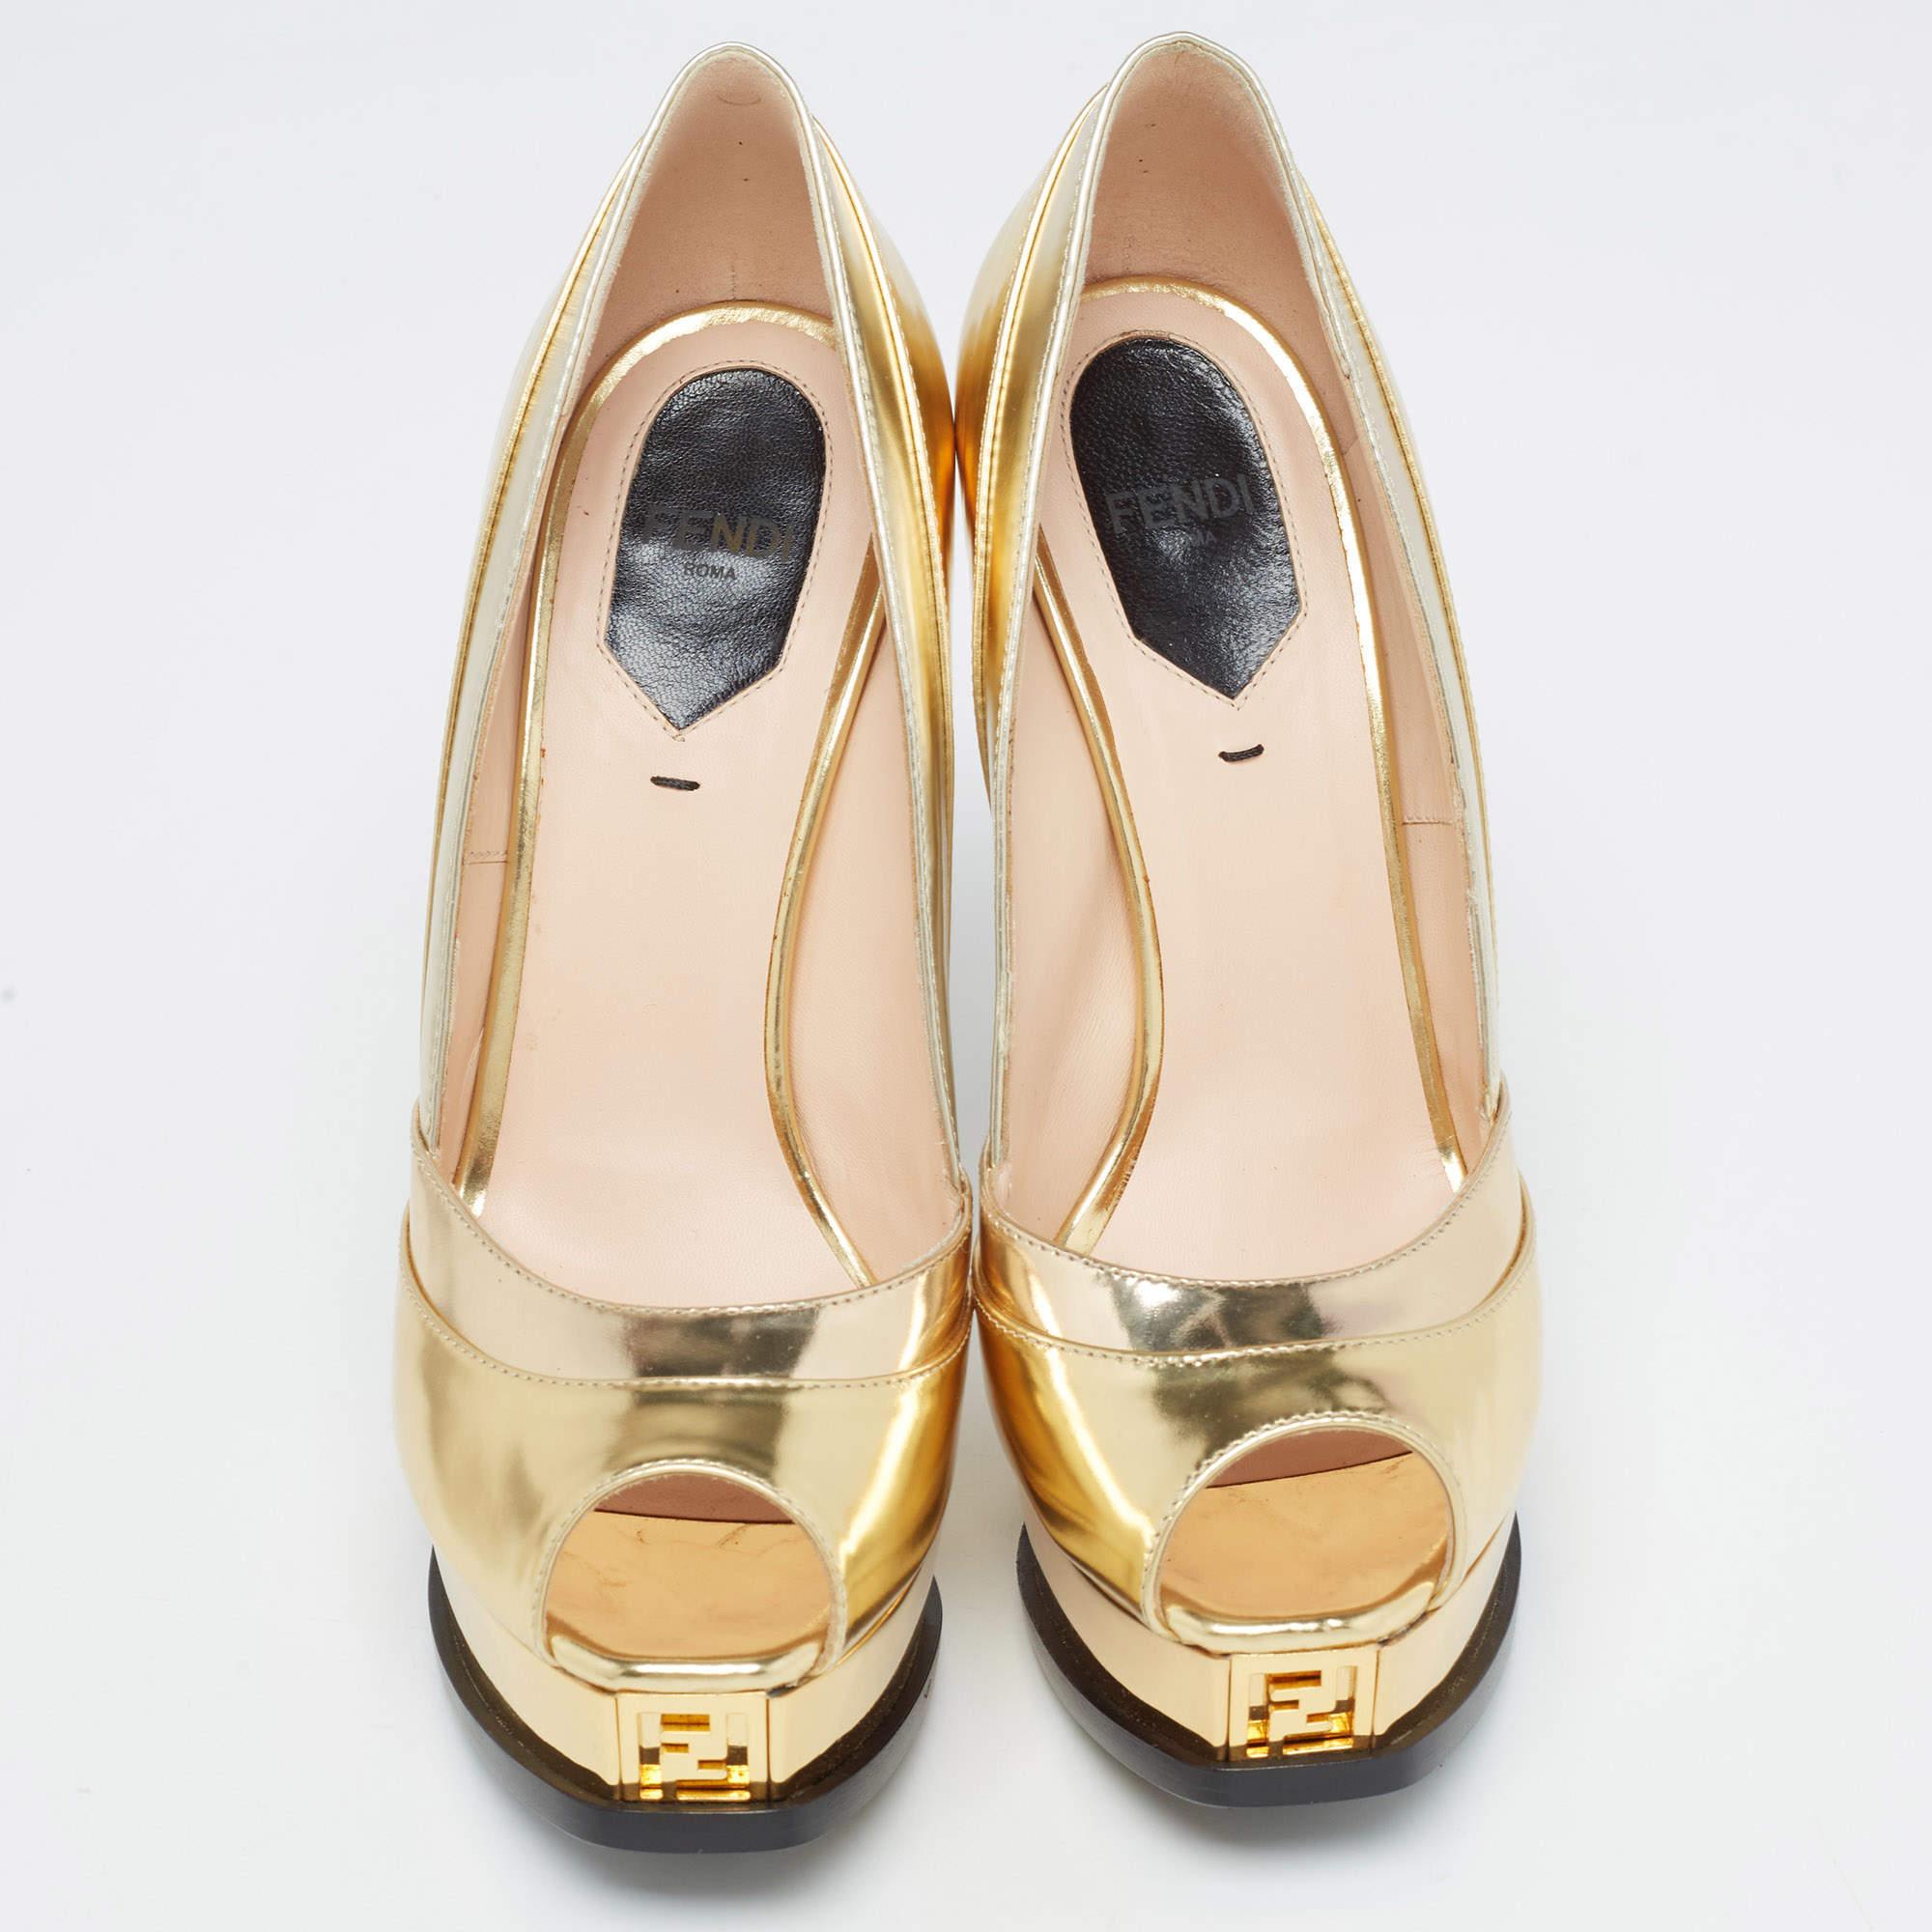 The fashion house’s tradition of excellence, coupled with modern design sensibilities, works to make these Fendi gold pumps a fabulous choice. They'll help you deliver a chic look with ease.

Includes: Original Dustbag, Original Box, invoice, extra